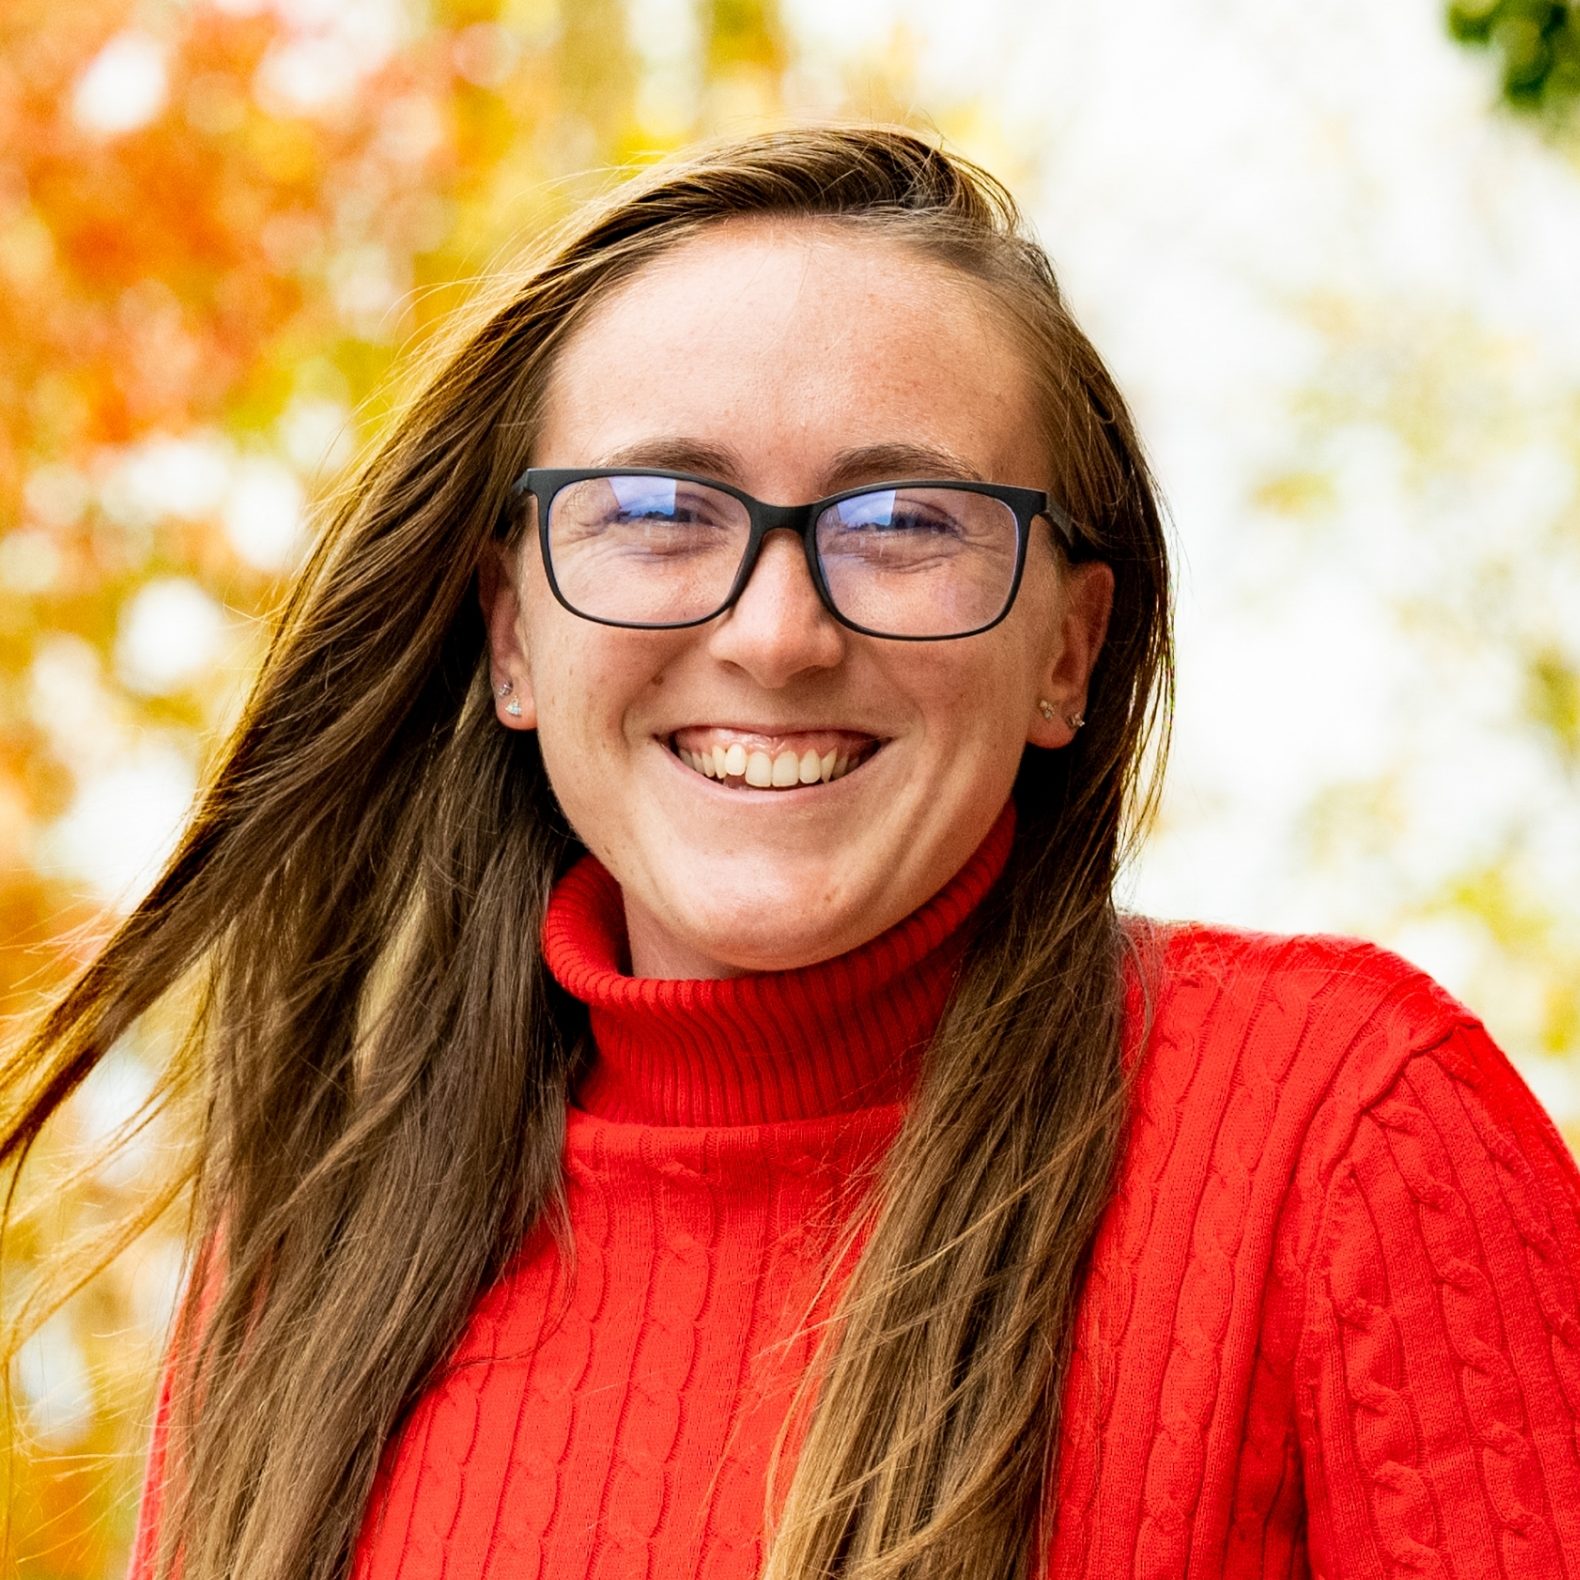 Student with red sweater smiling